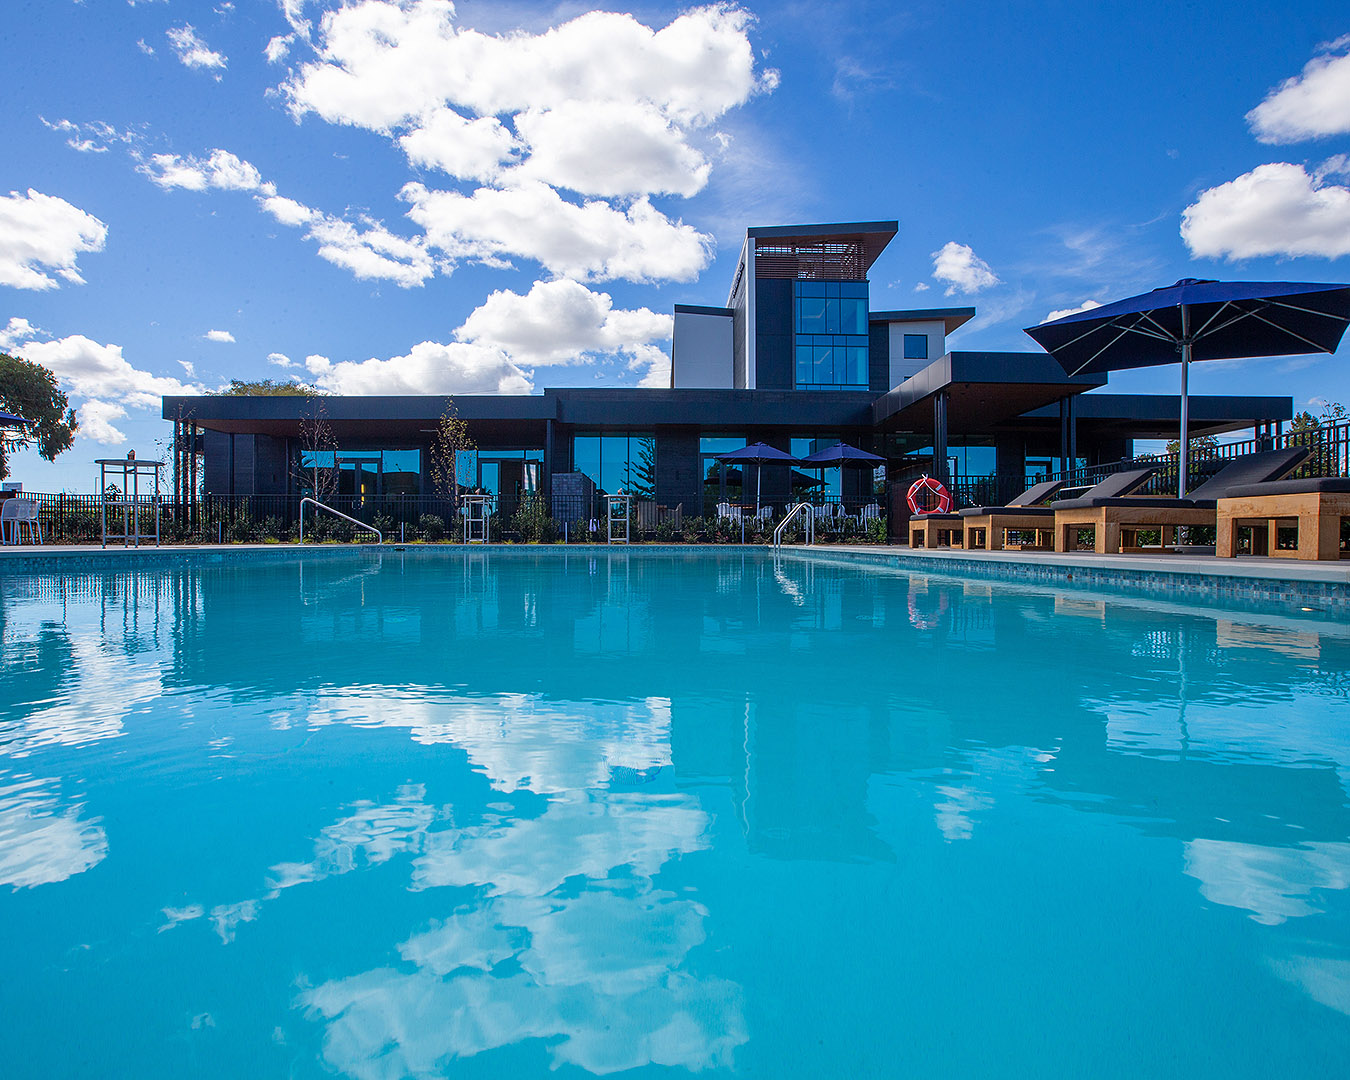 The pool and the exterior of the Doubletree by Hilton.